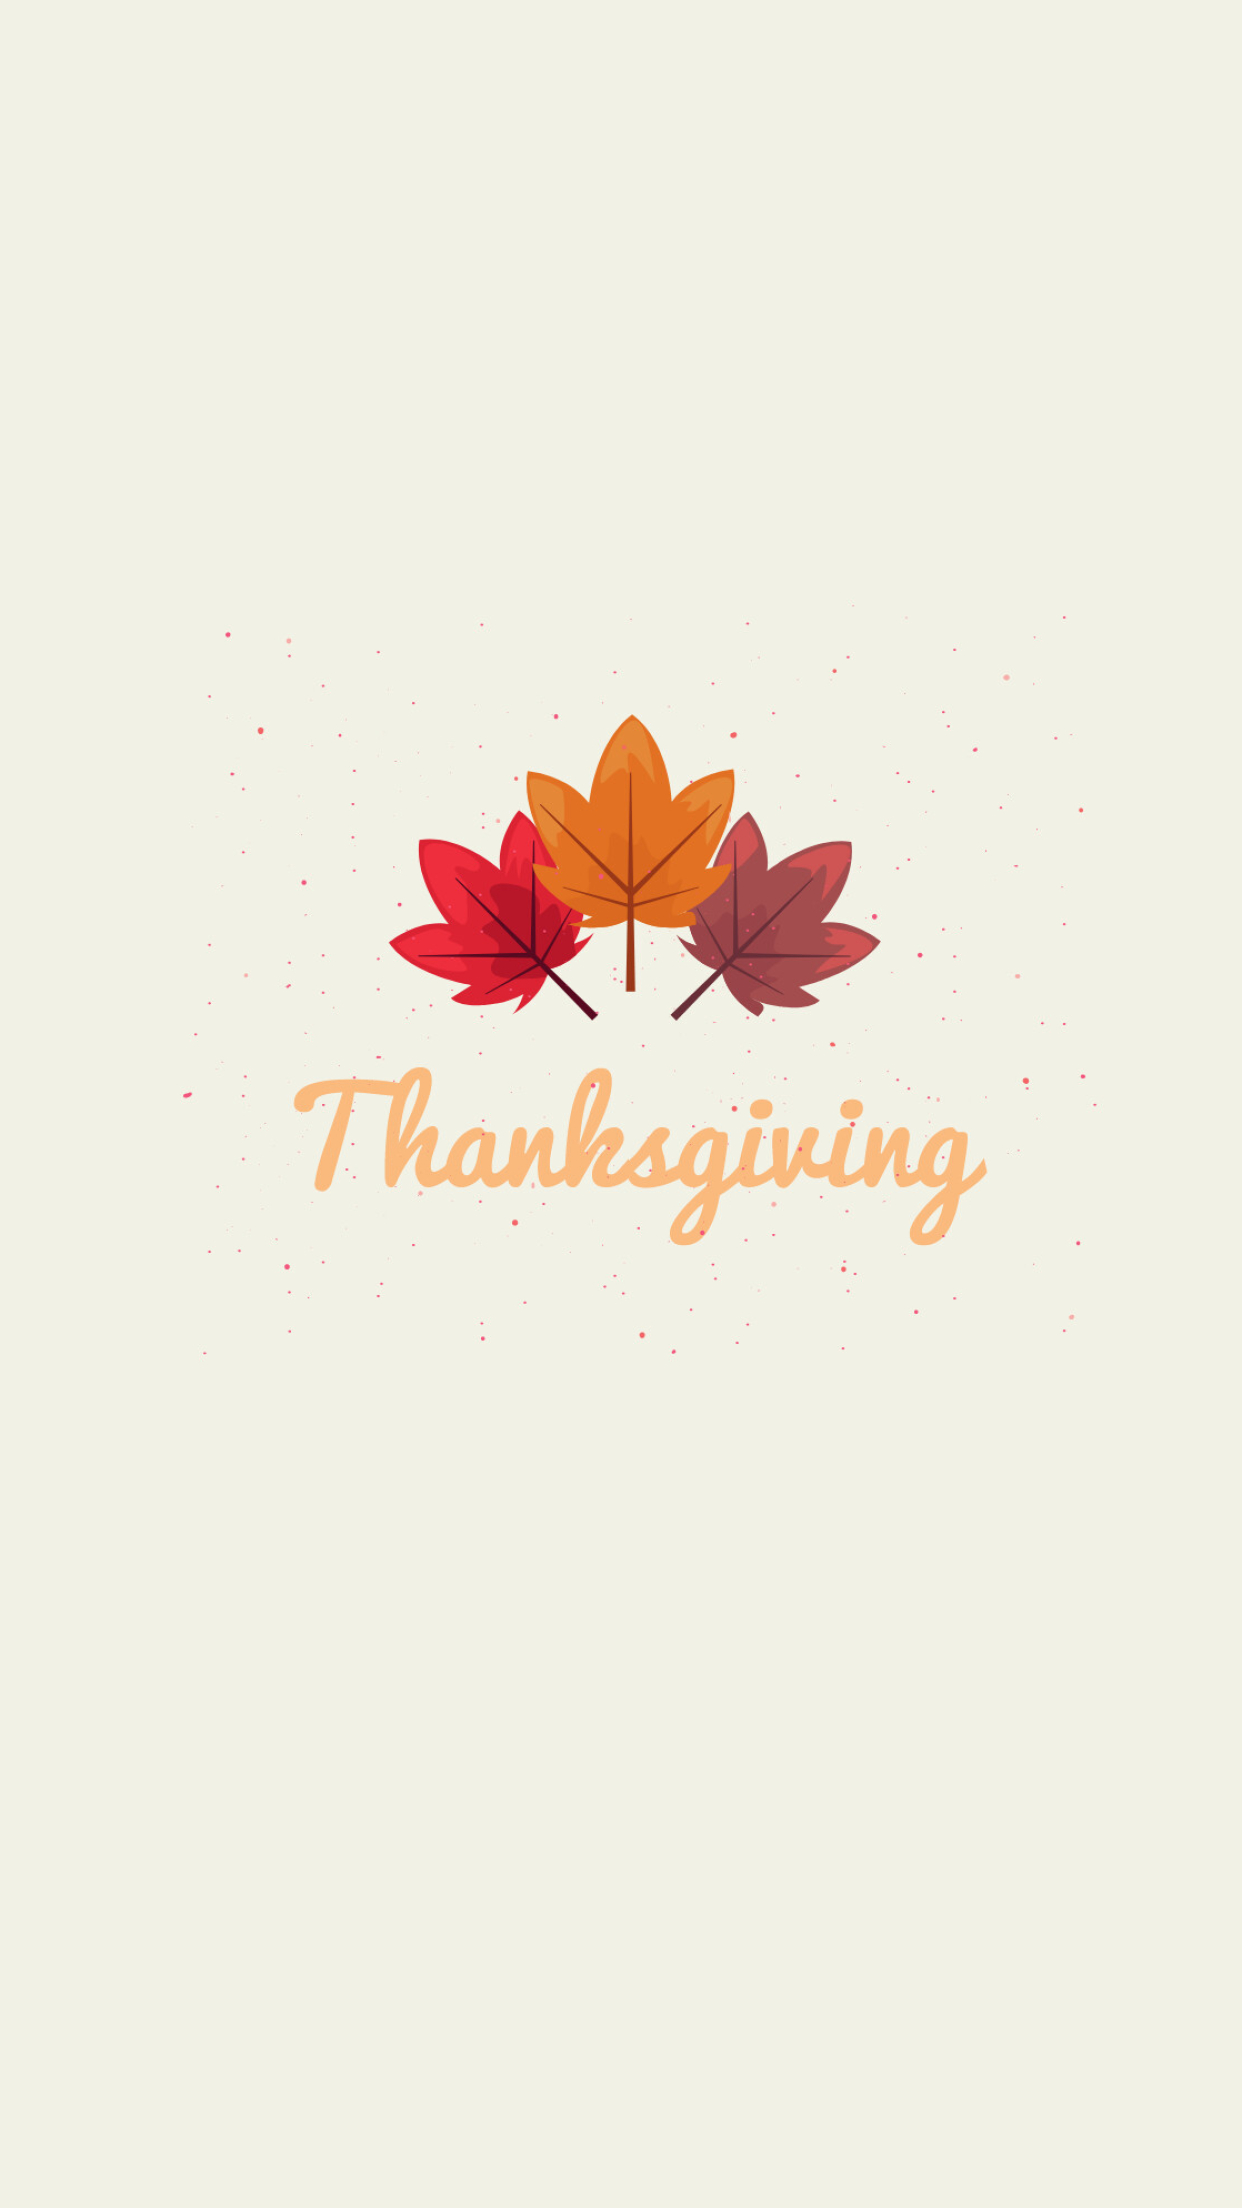 Thanksgiving: A day for Americans to gather for a day of feasting, football, and family, Art. 1250x2210 HD Background.